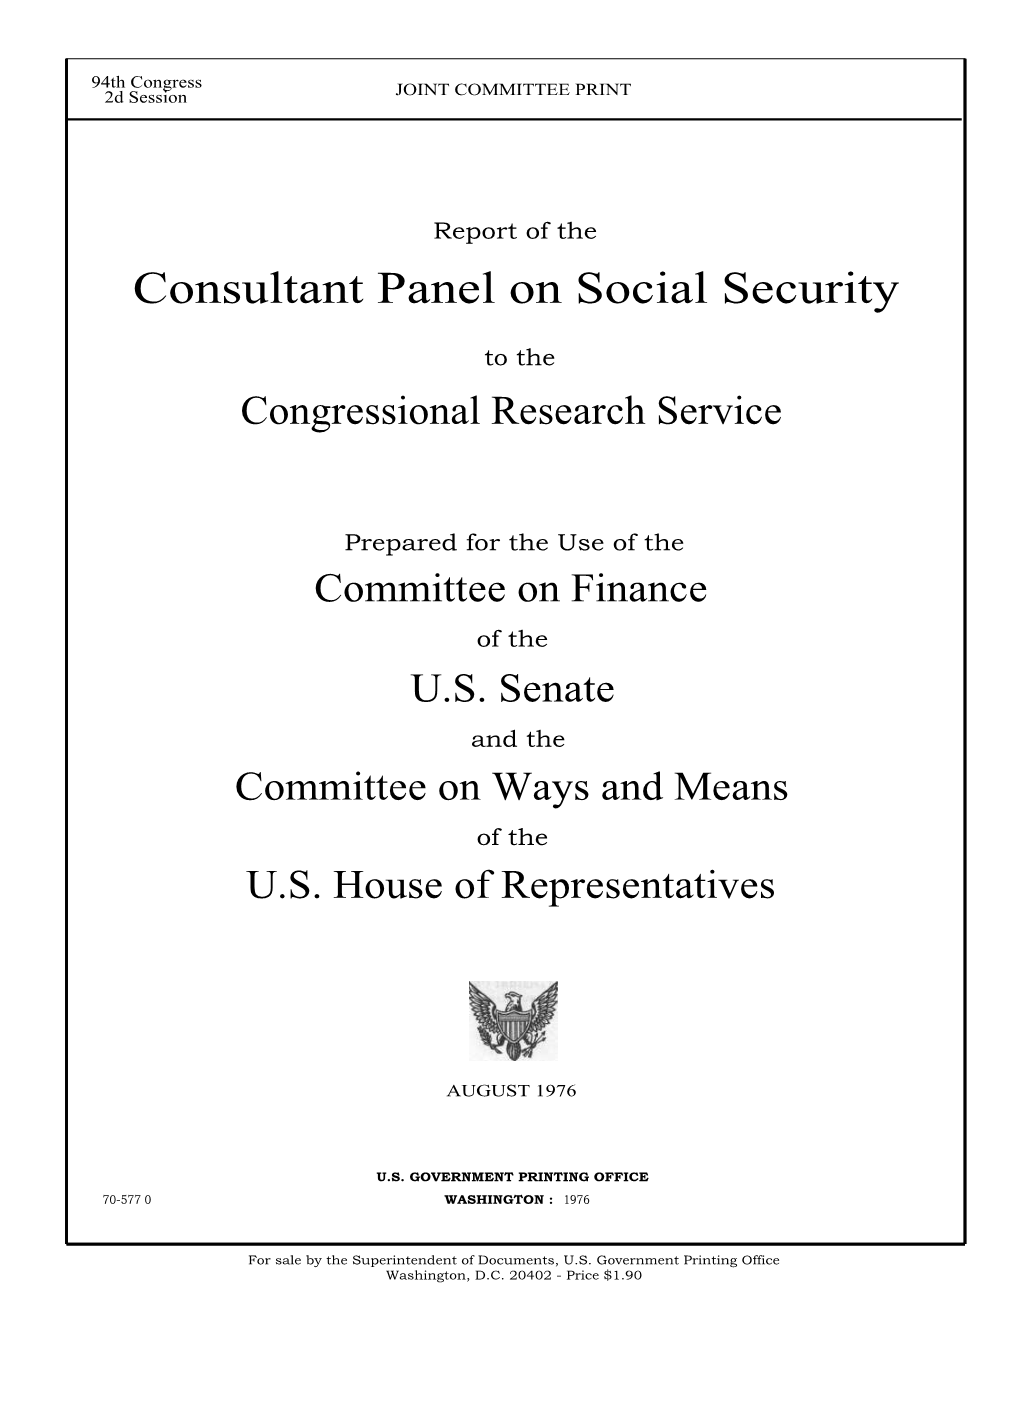 Consultant Panel on Social Security